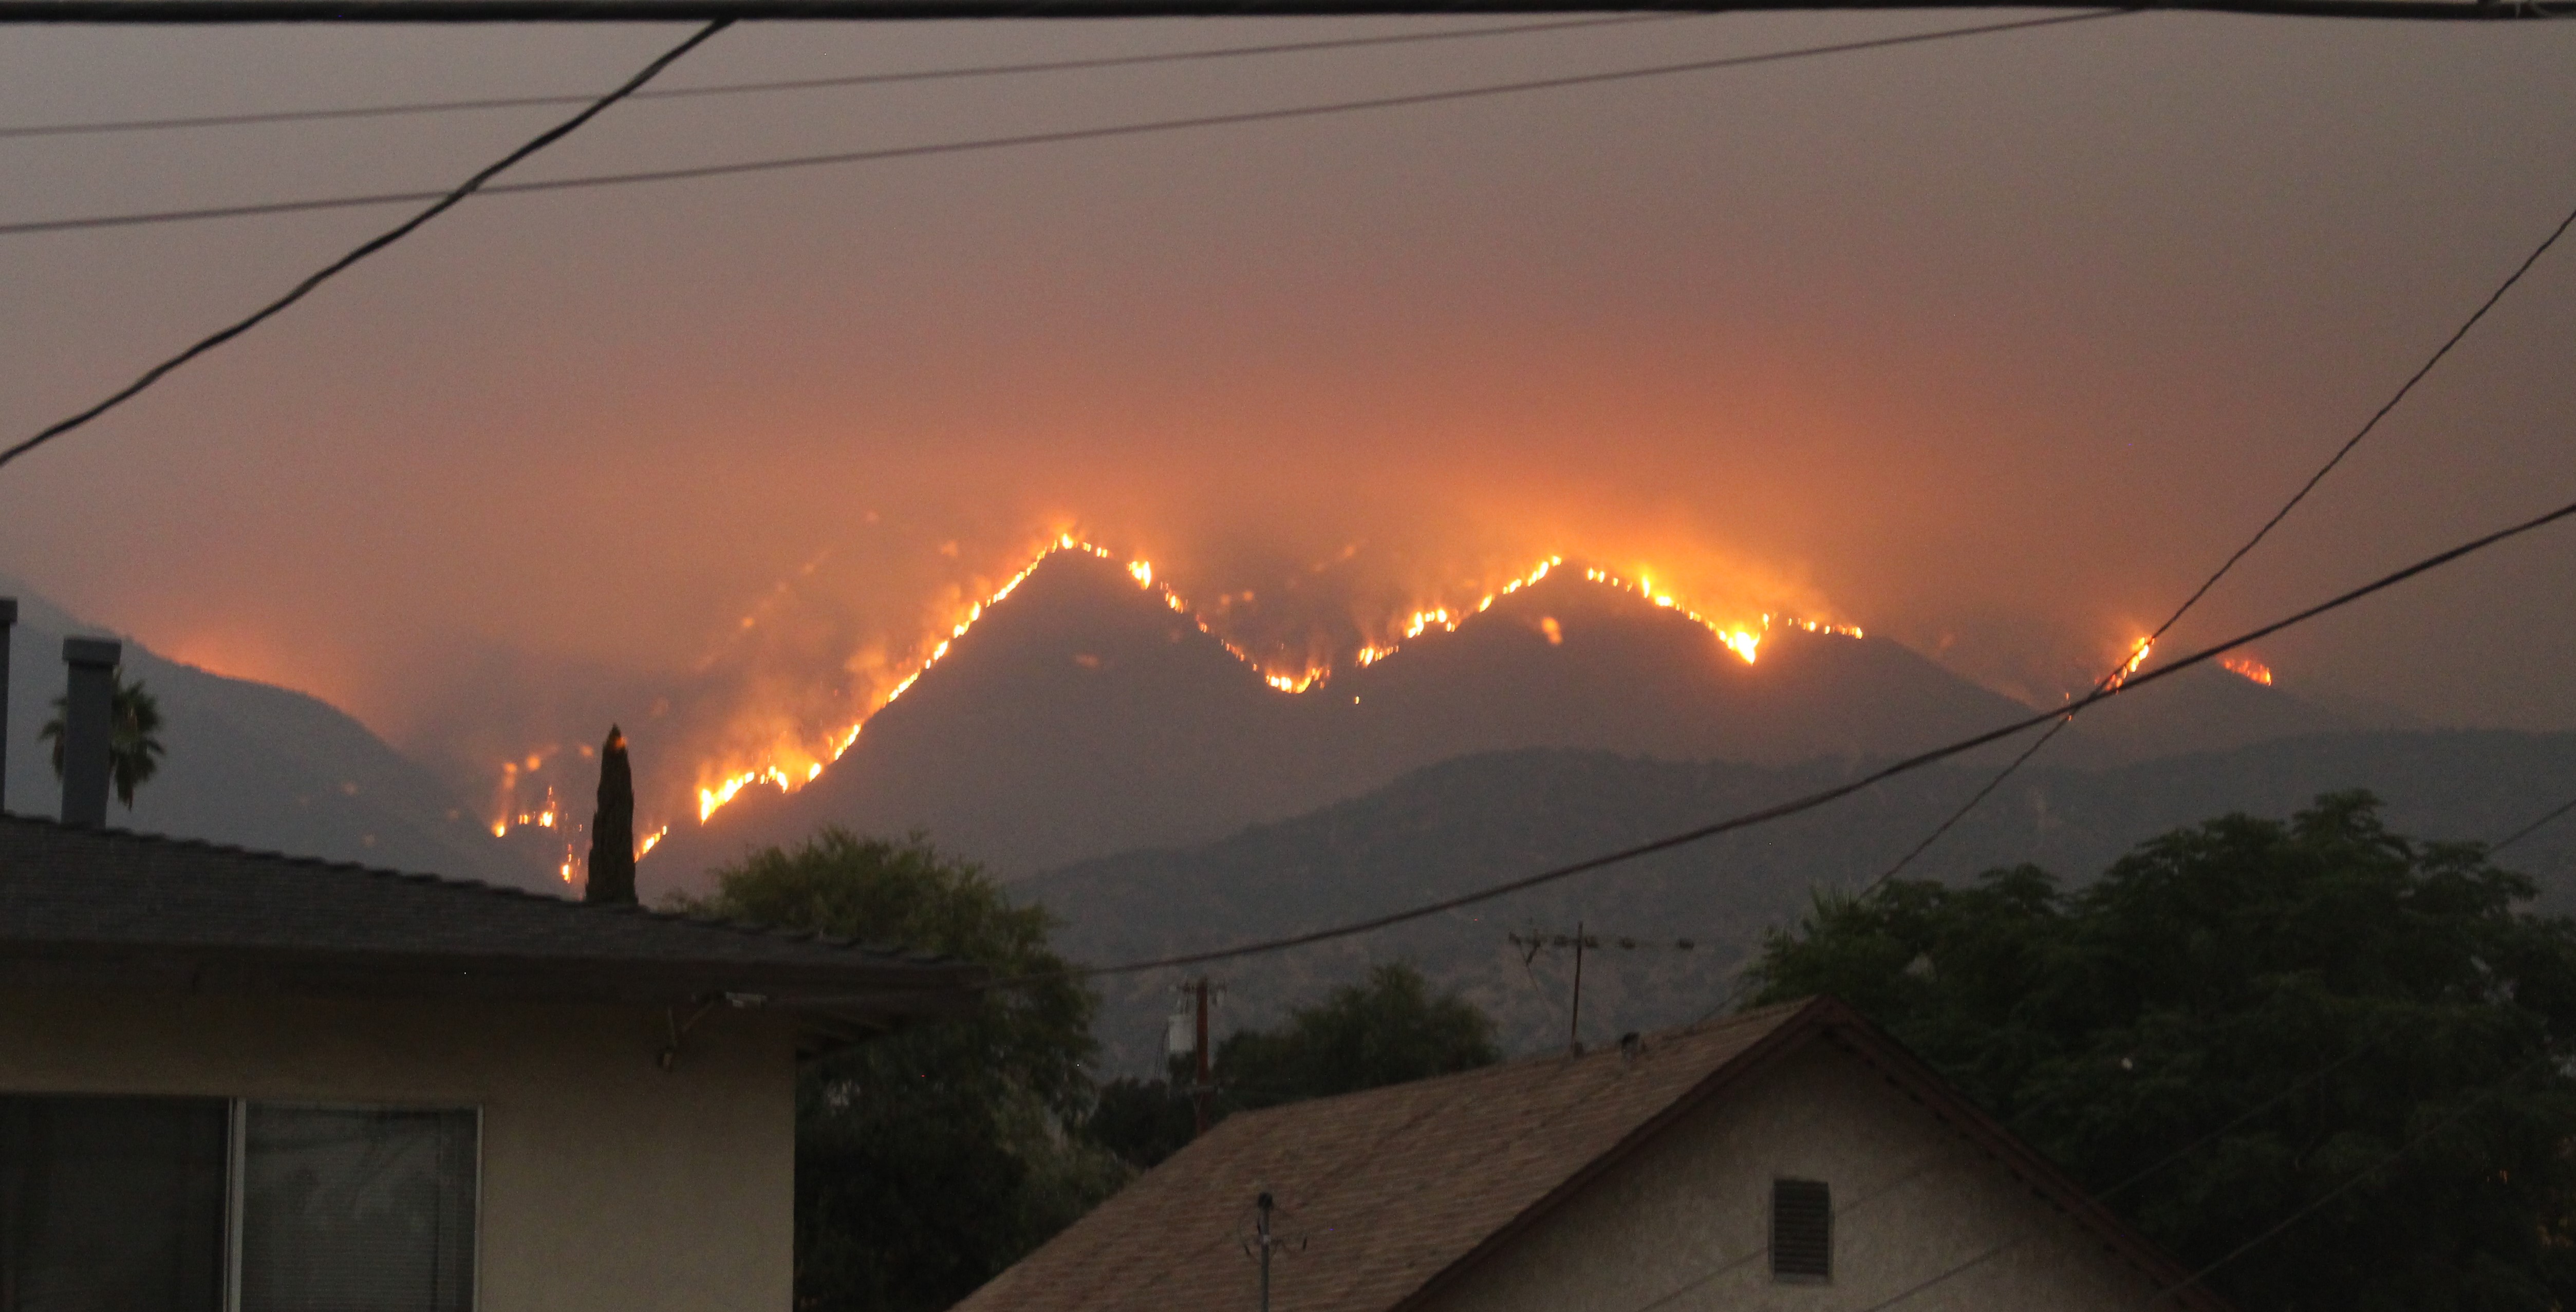 Bobcat Fire view from a home in Monrovia, CA, September 10, 2020 